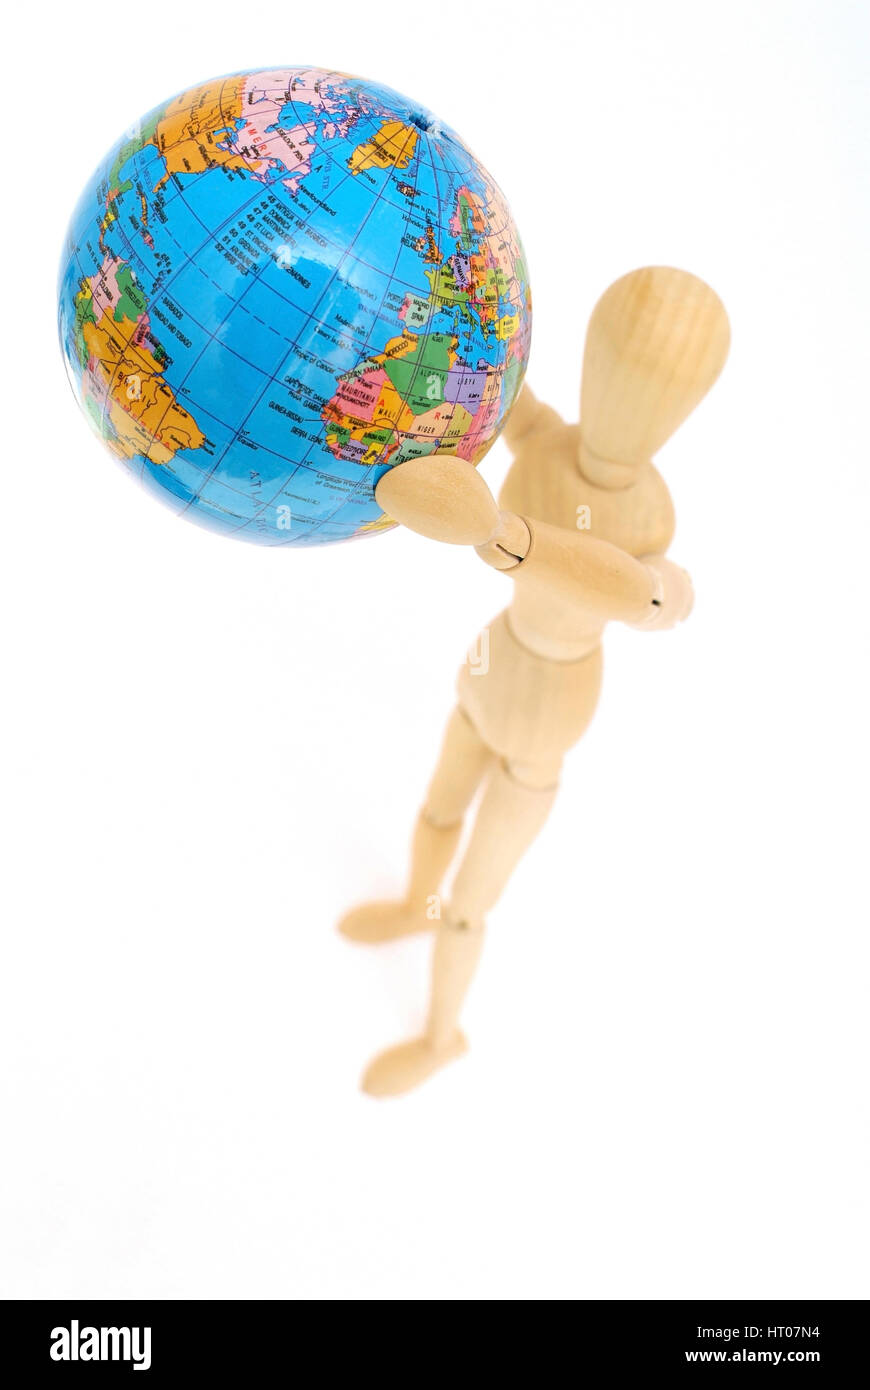 Holzfigur haelt Globus in der Hand - jointed doll with globe in hands Stock Photo